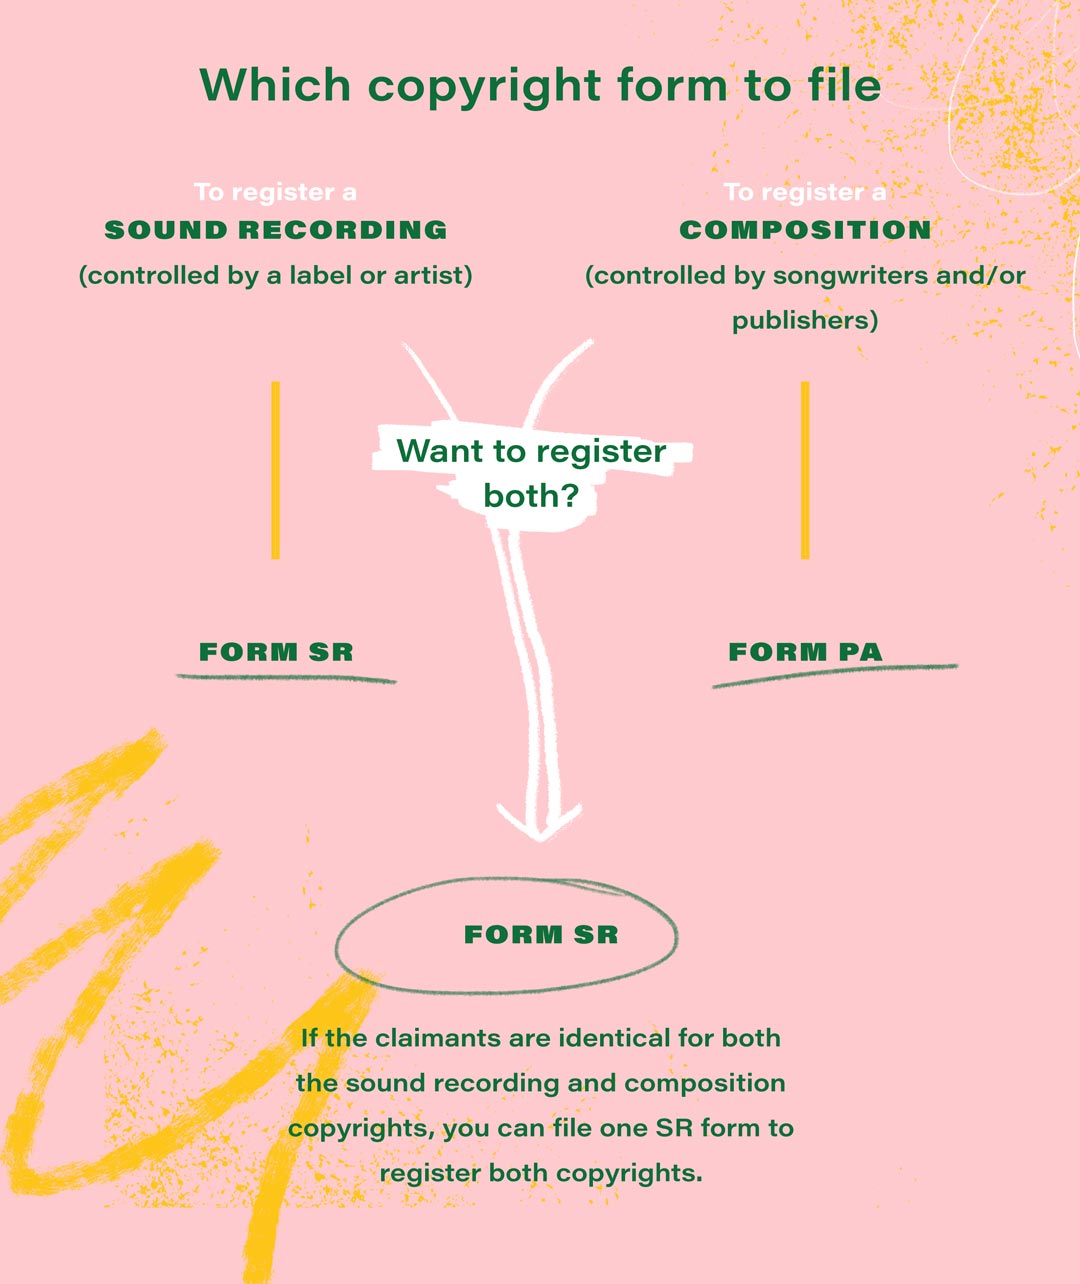 Which copyright form should you file for your music